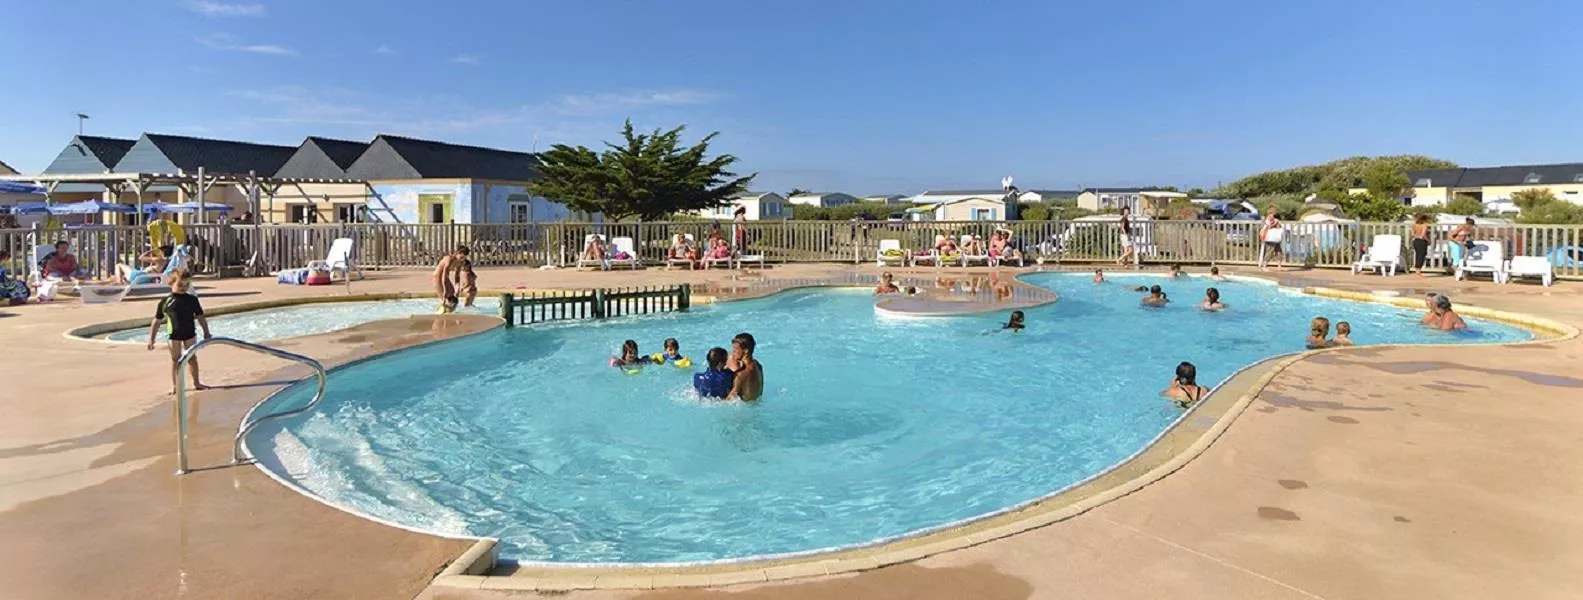 Flower Camping Les Paludiers -